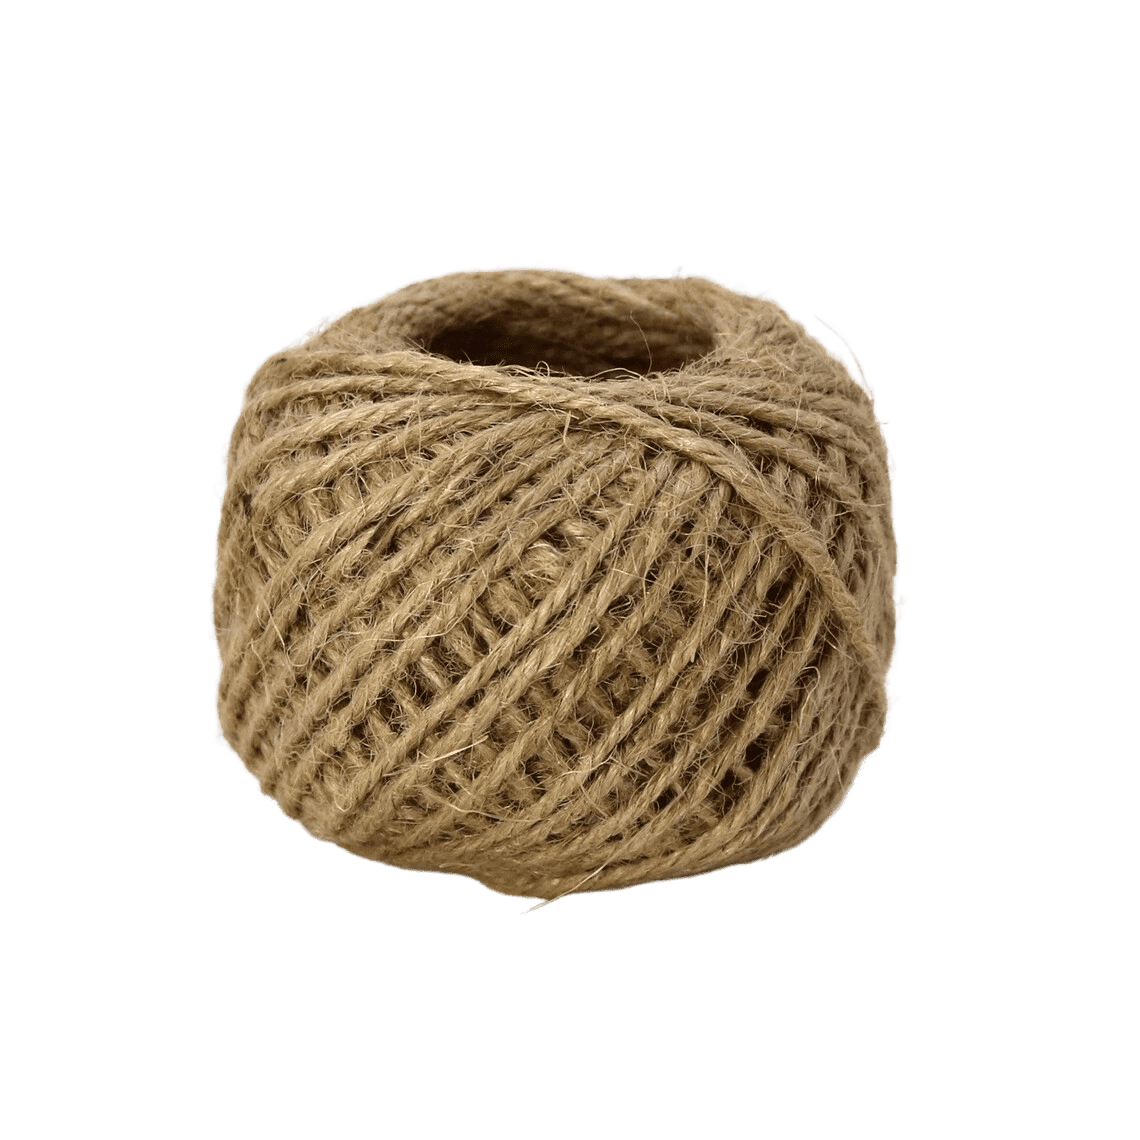 Oak Garden twine stand with Large 500g jute string – brush64